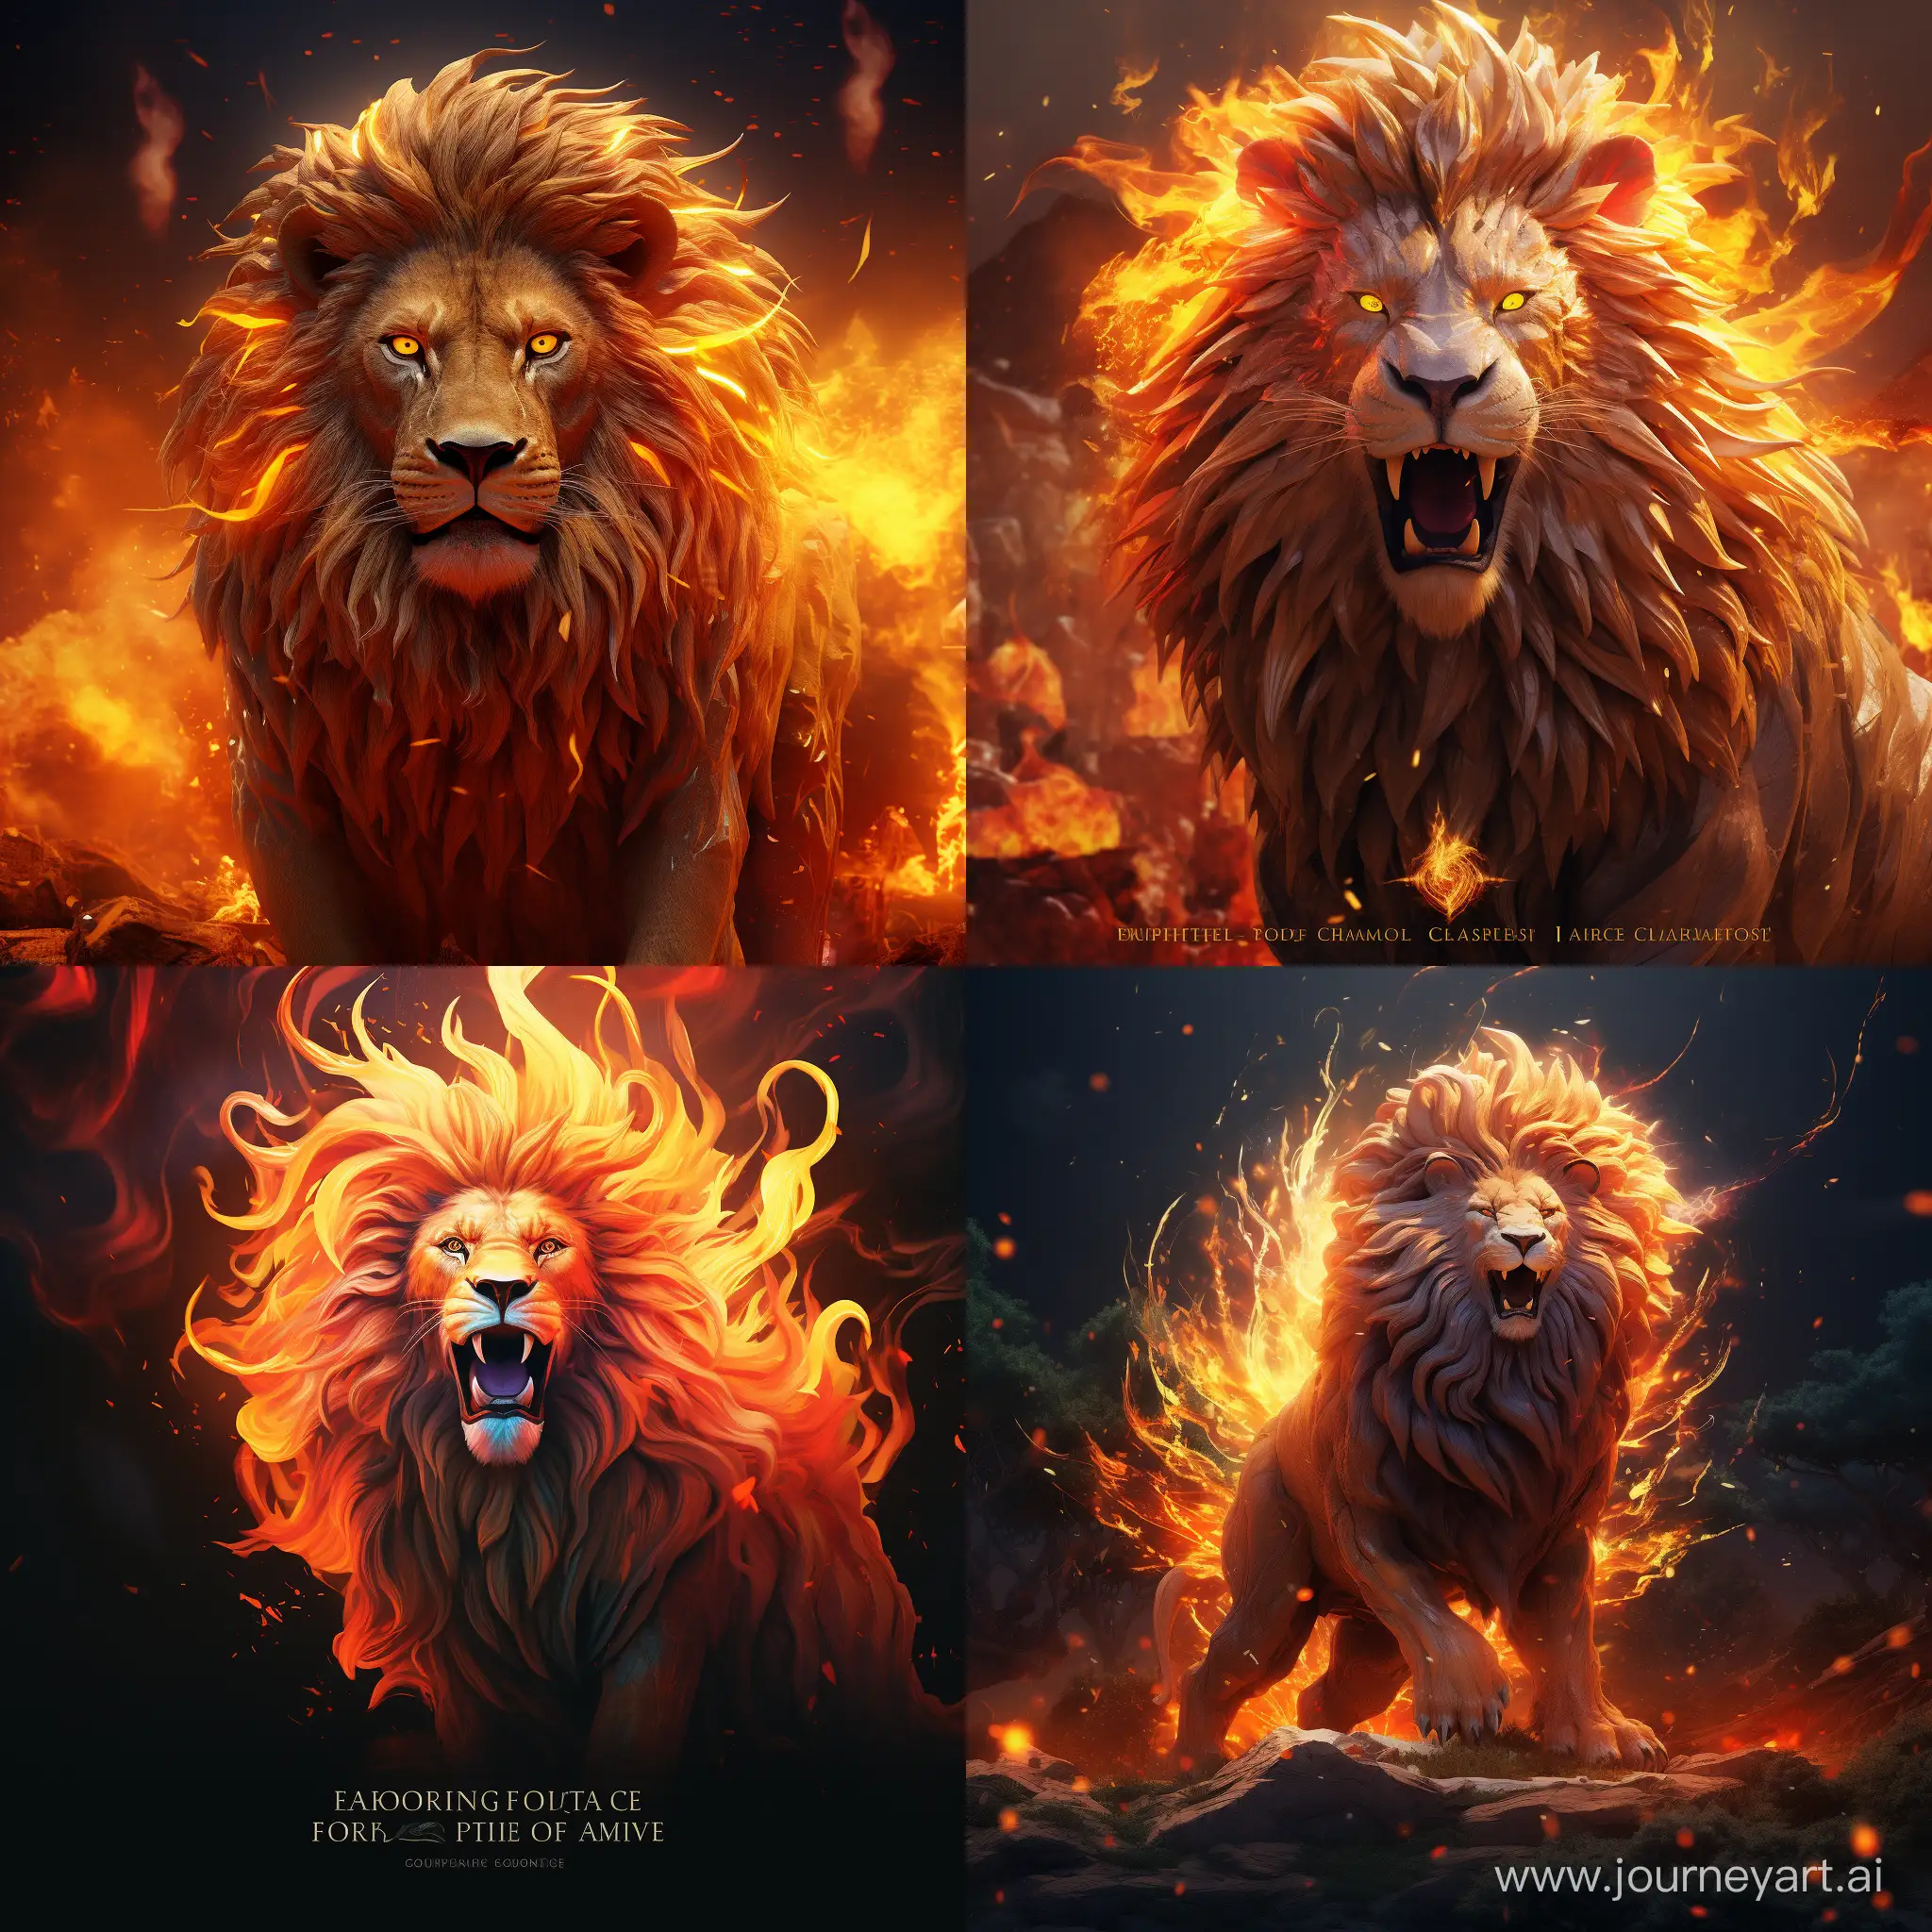 Dazzling-Flame-of-Justice-A-Detailed-and-Courageous-Lion-in-8K-UltraHigh-Definition